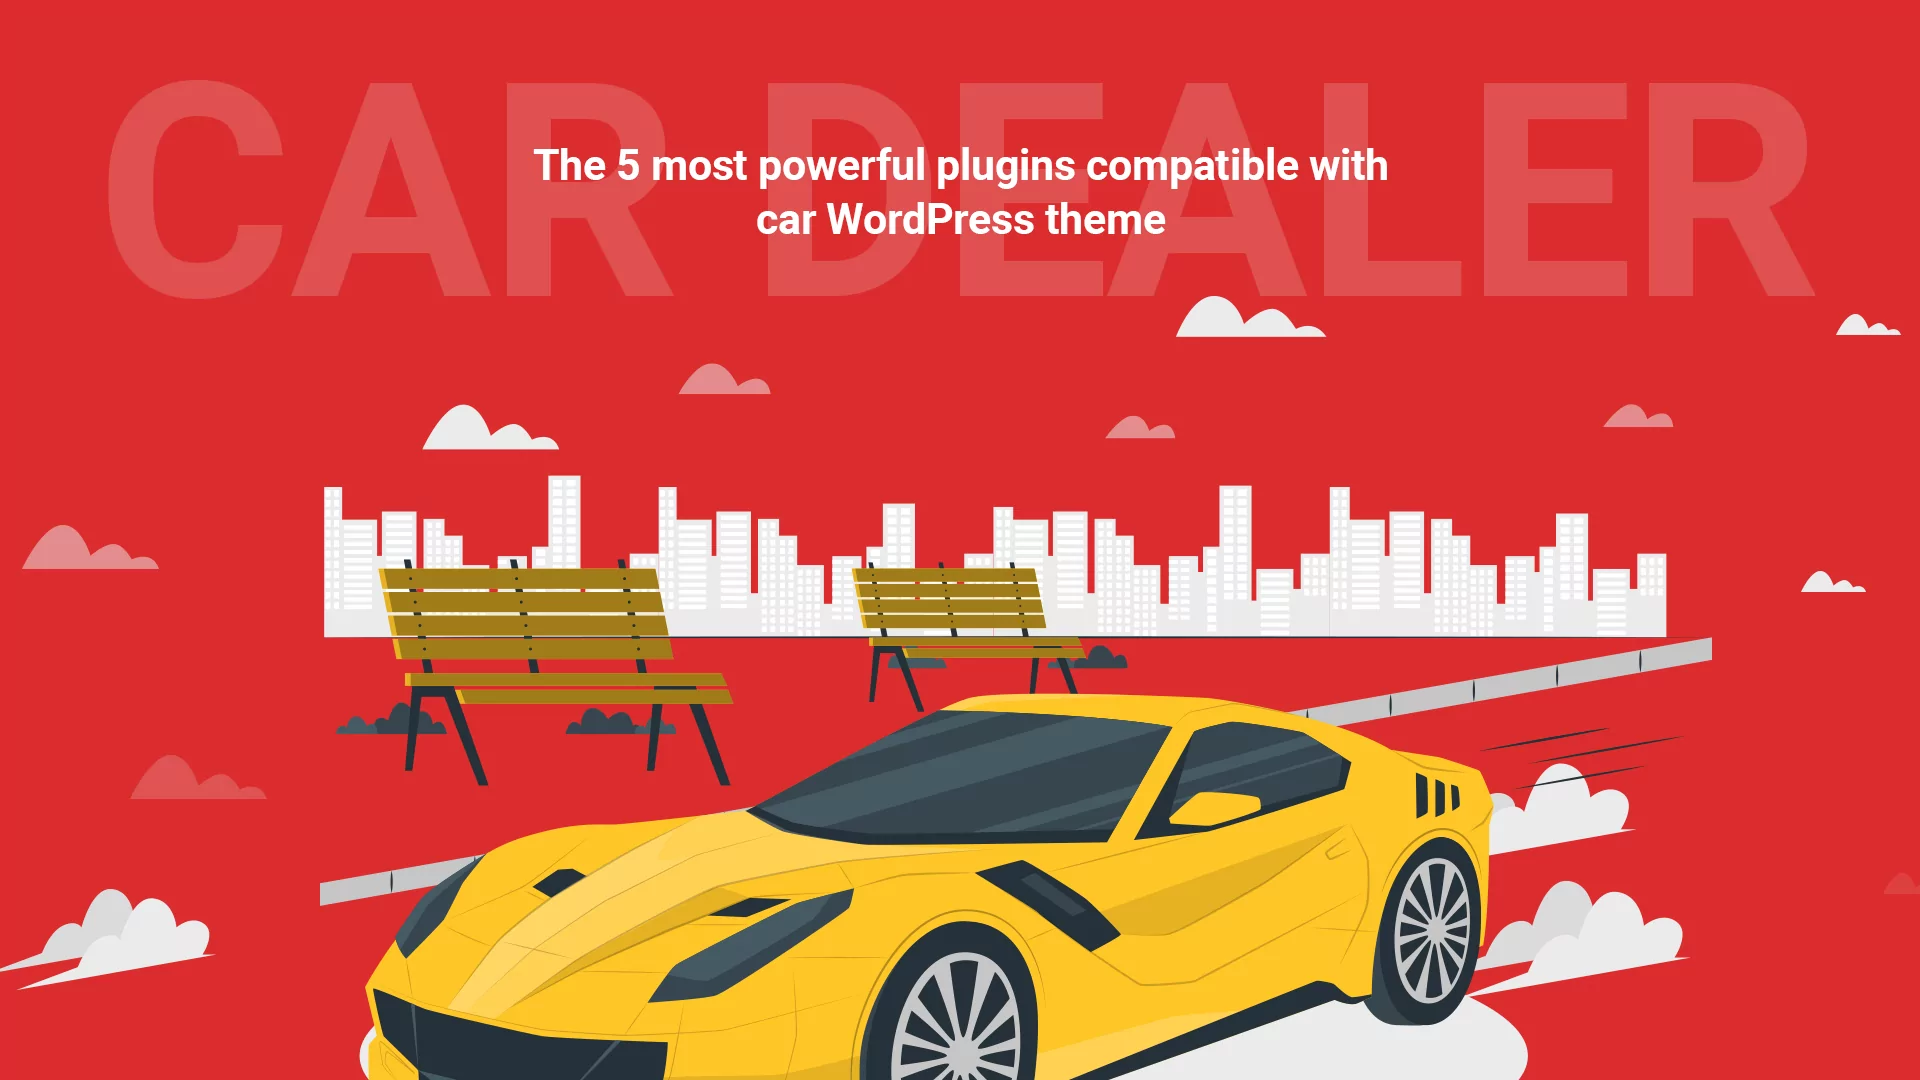 The 5 most powerful plugins compatible with car WordPress theme